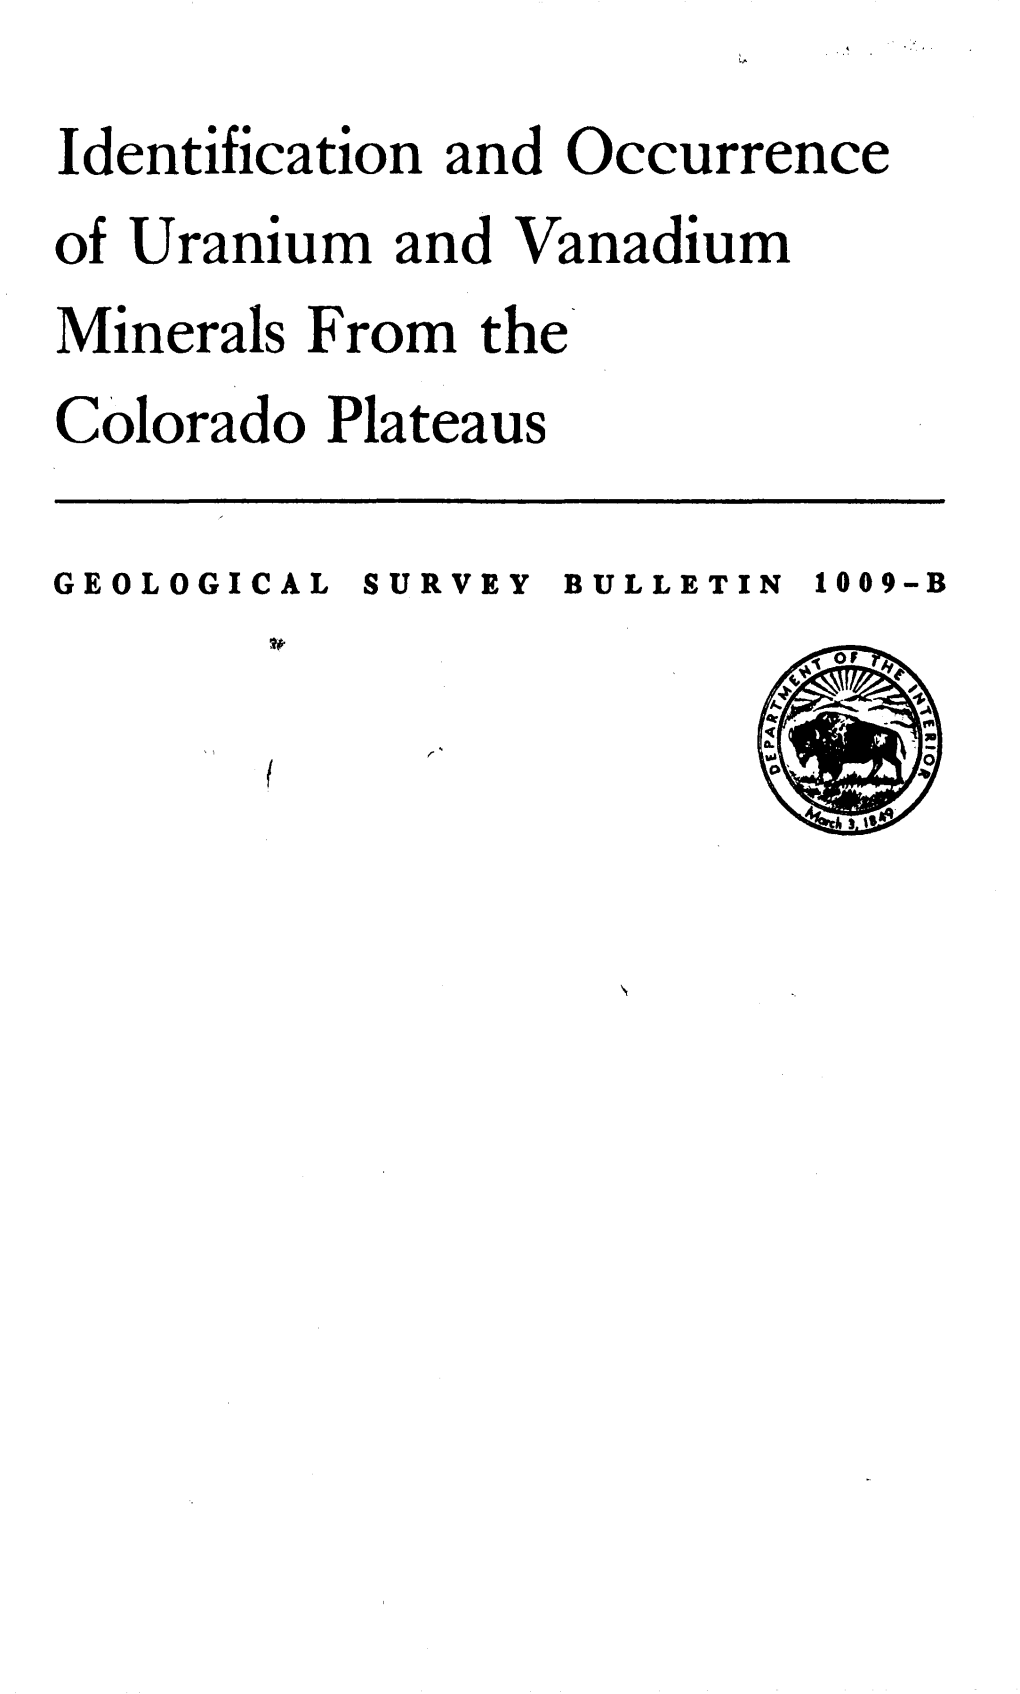 Identification and Occurrence of Uranium and Vanadium Minerals from the Colorado Plateaus